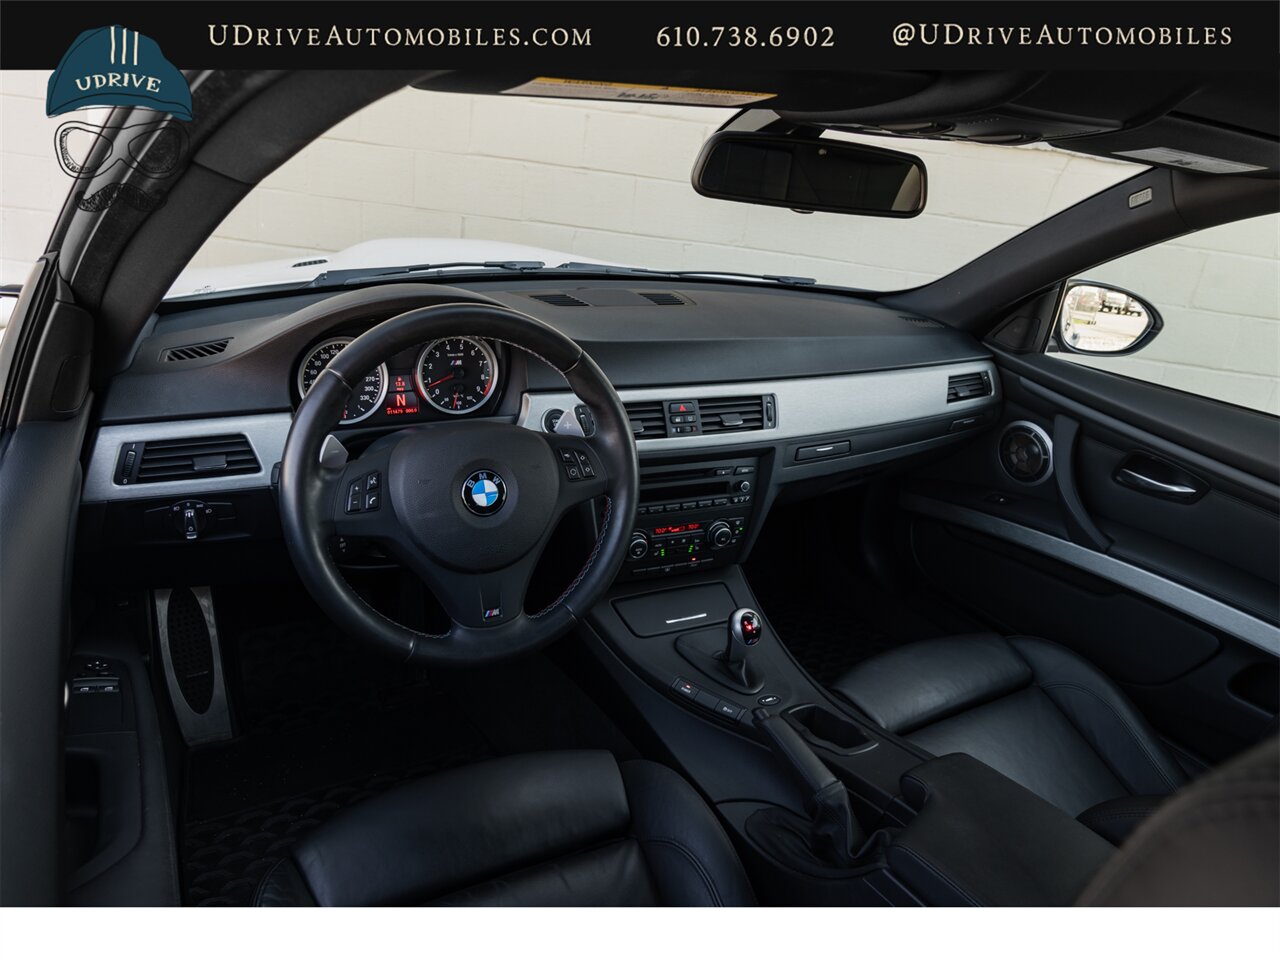 2011 BMW M3  No Nav Carbon Roof Comf Acc 19in Whls 11k Miles - Photo 34 - West Chester, PA 19382